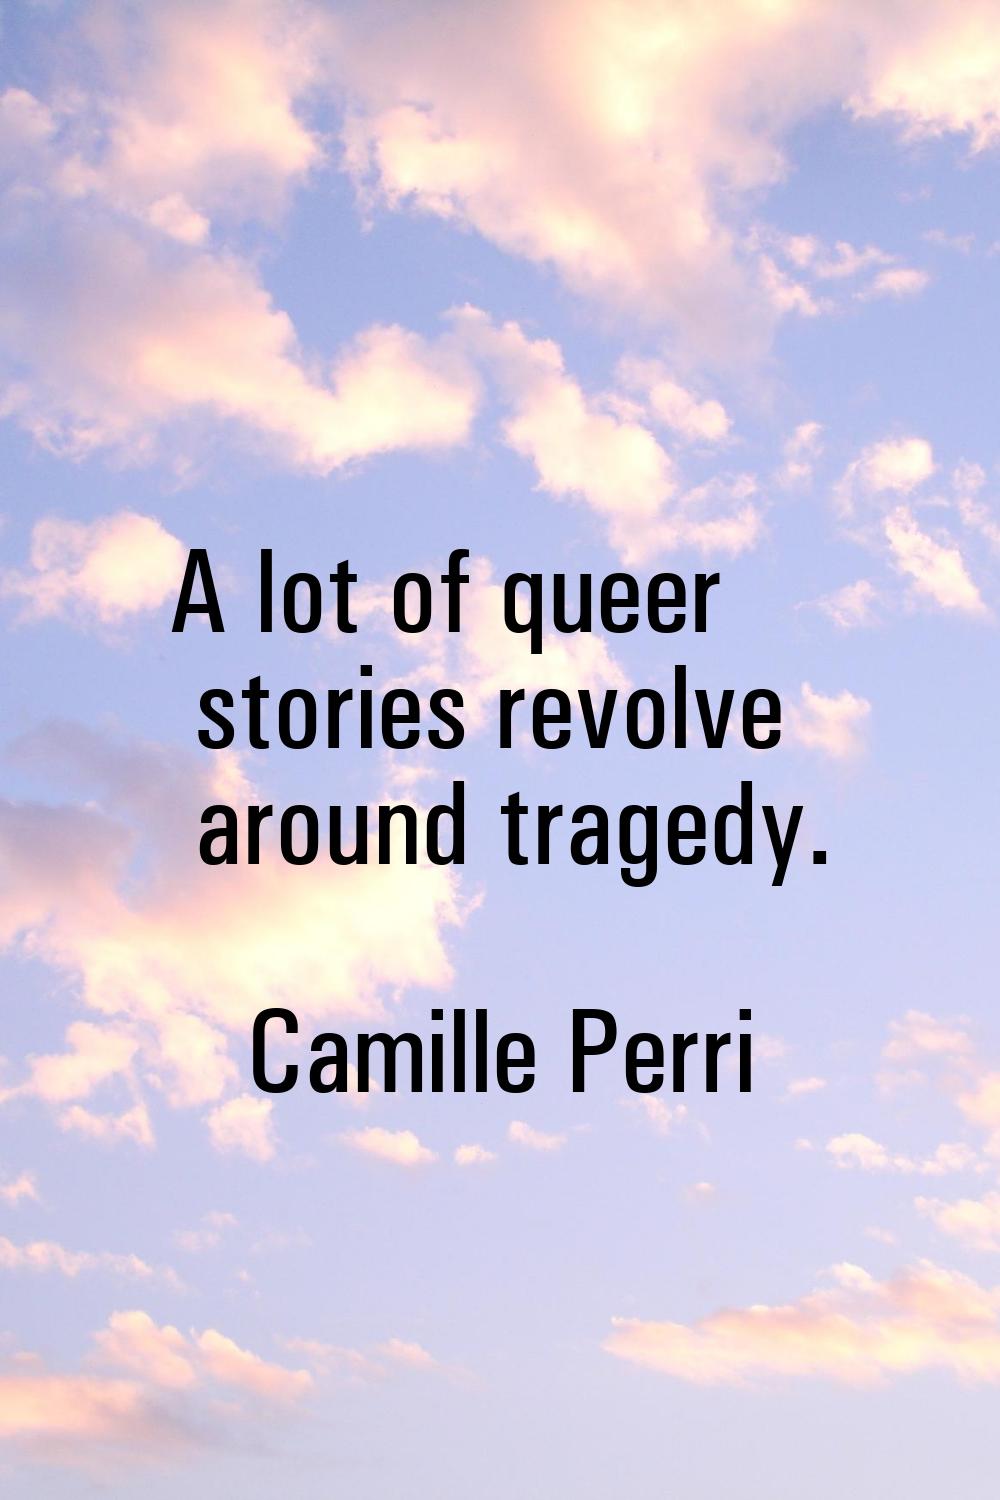 A lot of queer stories revolve around tragedy.